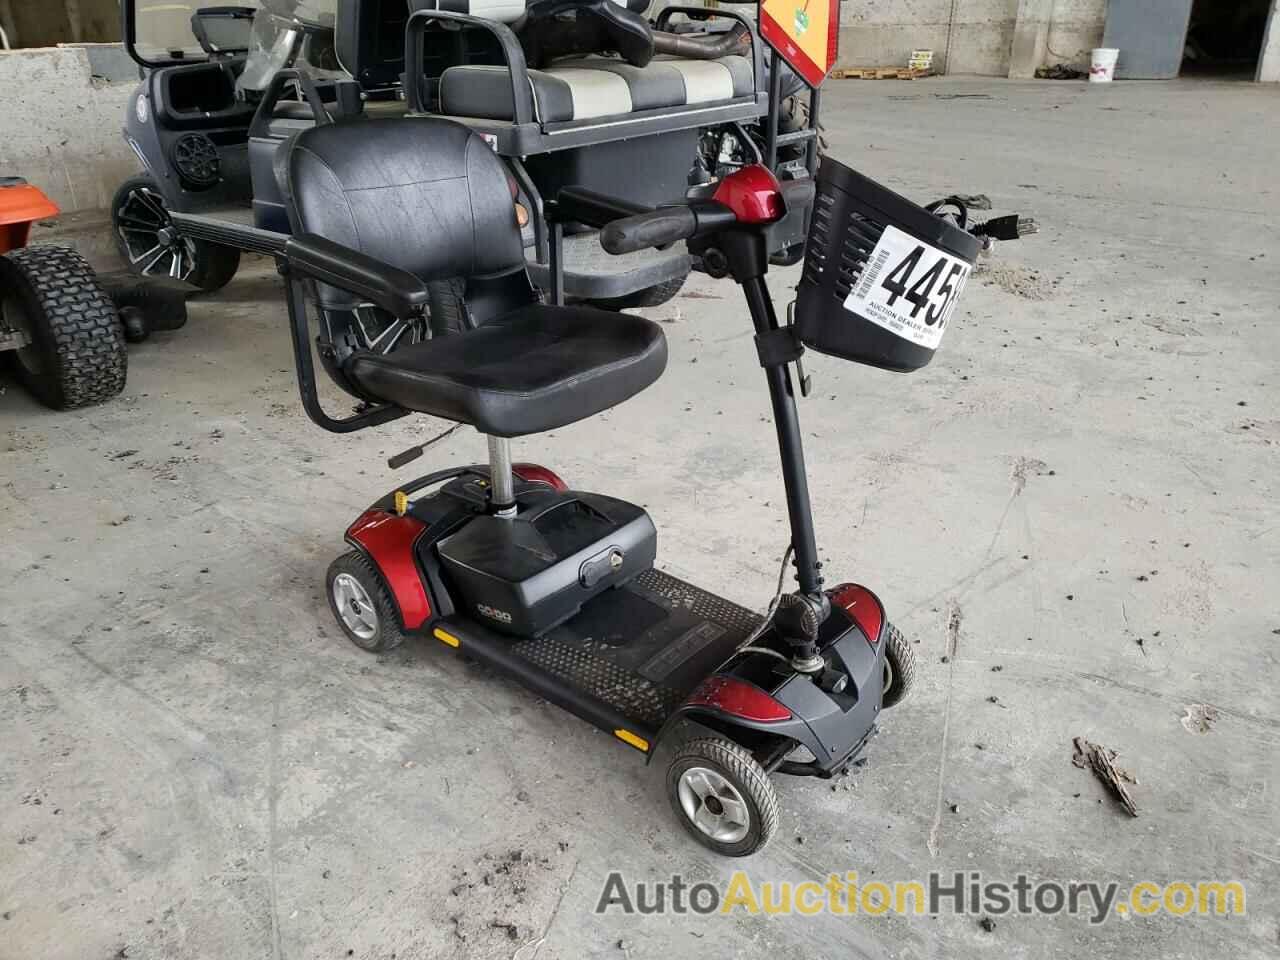 2000 OTHER SCOOTER, B1LL0FSALE4458642